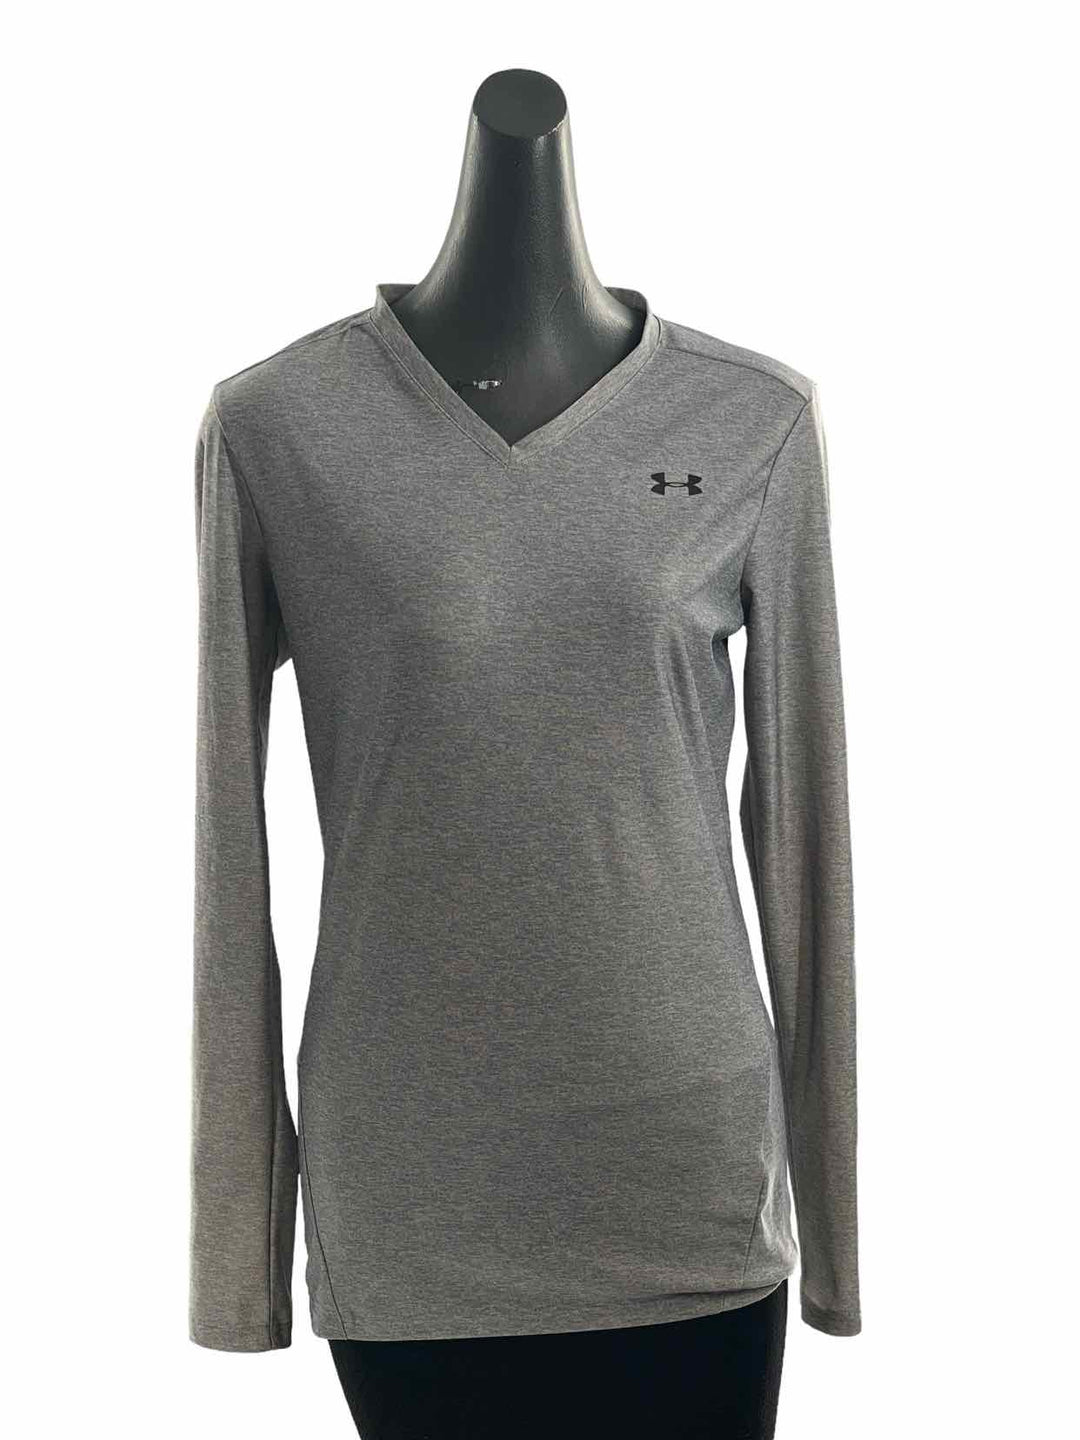 Under Armour Size XL Gray Athletic Long Sleeve